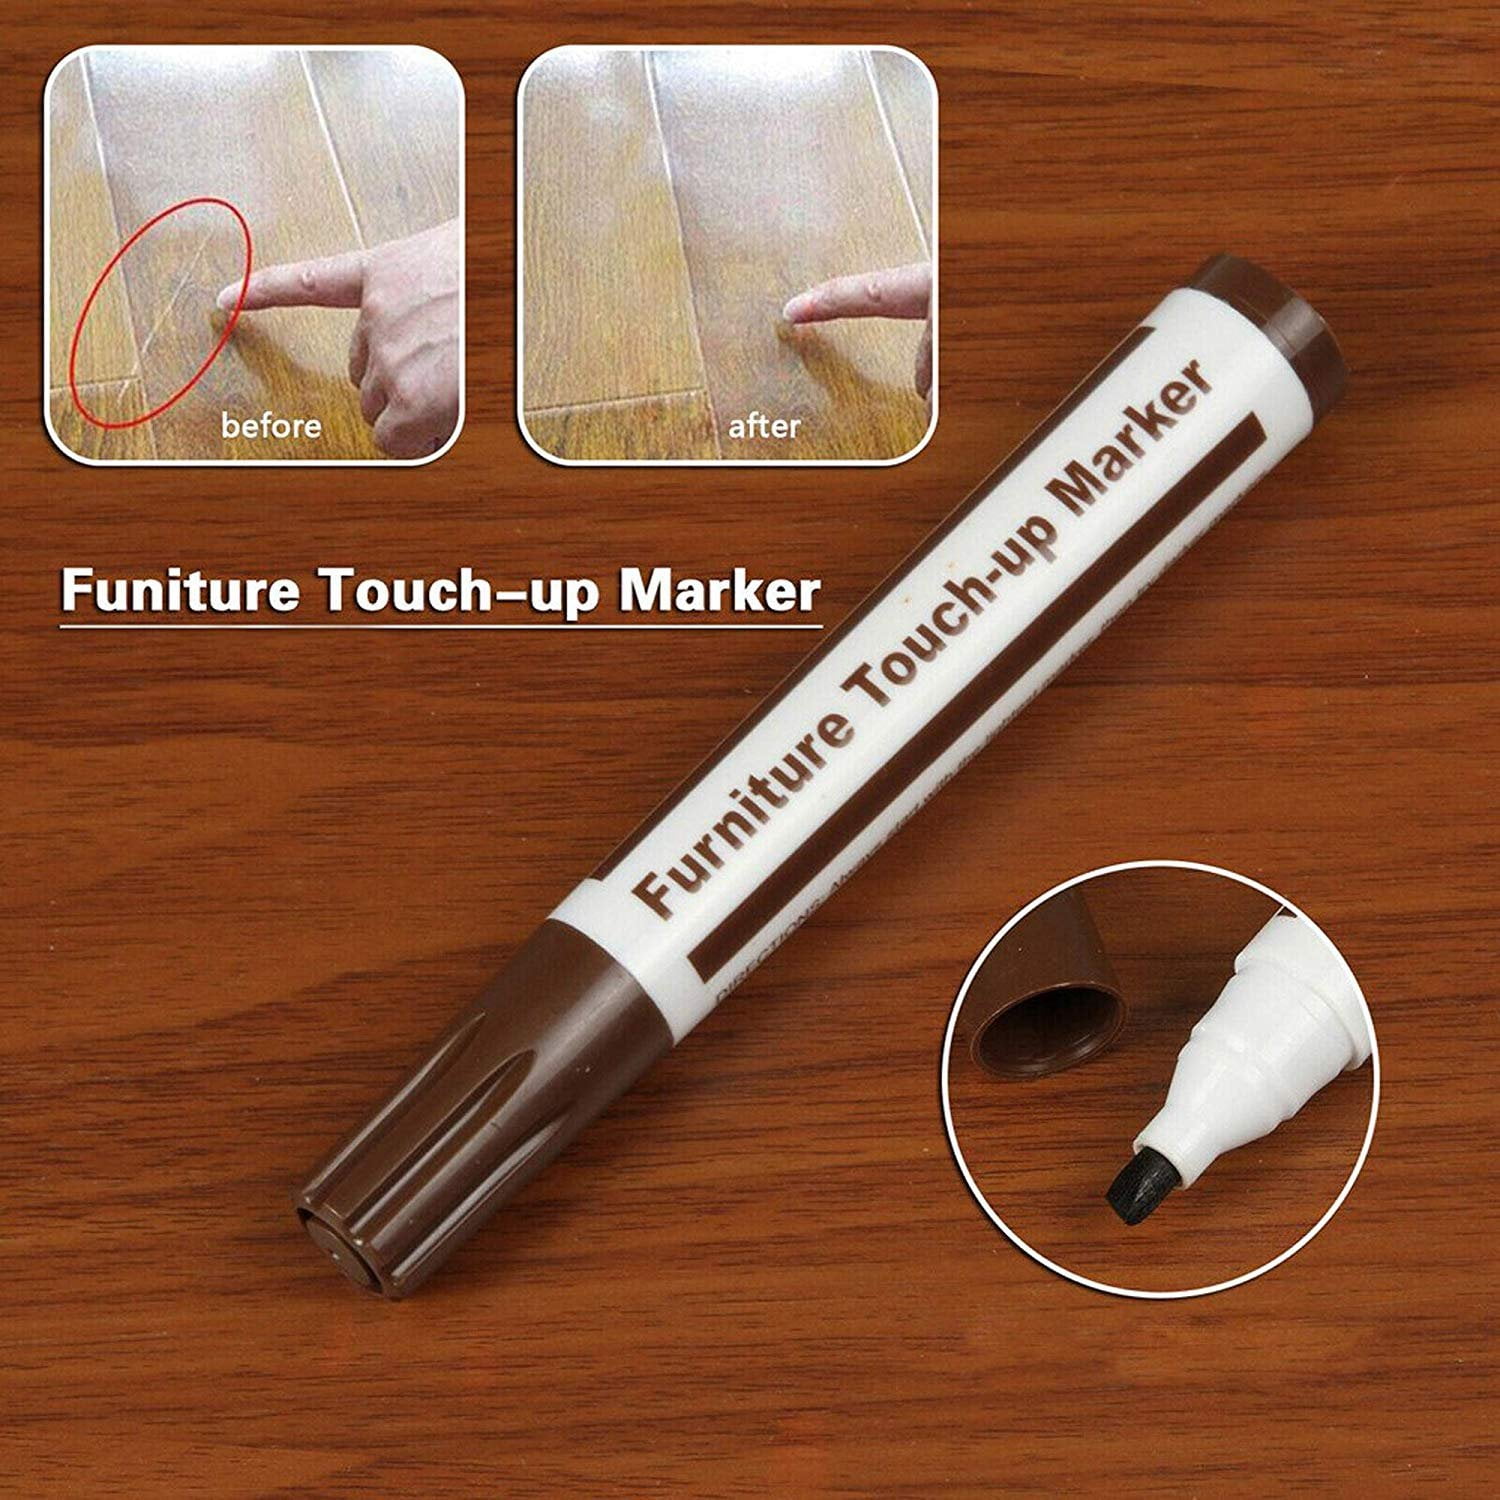 14 Wood Touch Up Scratch Scuff Repair Marker Wooden Floor Furniture Mark Remover 